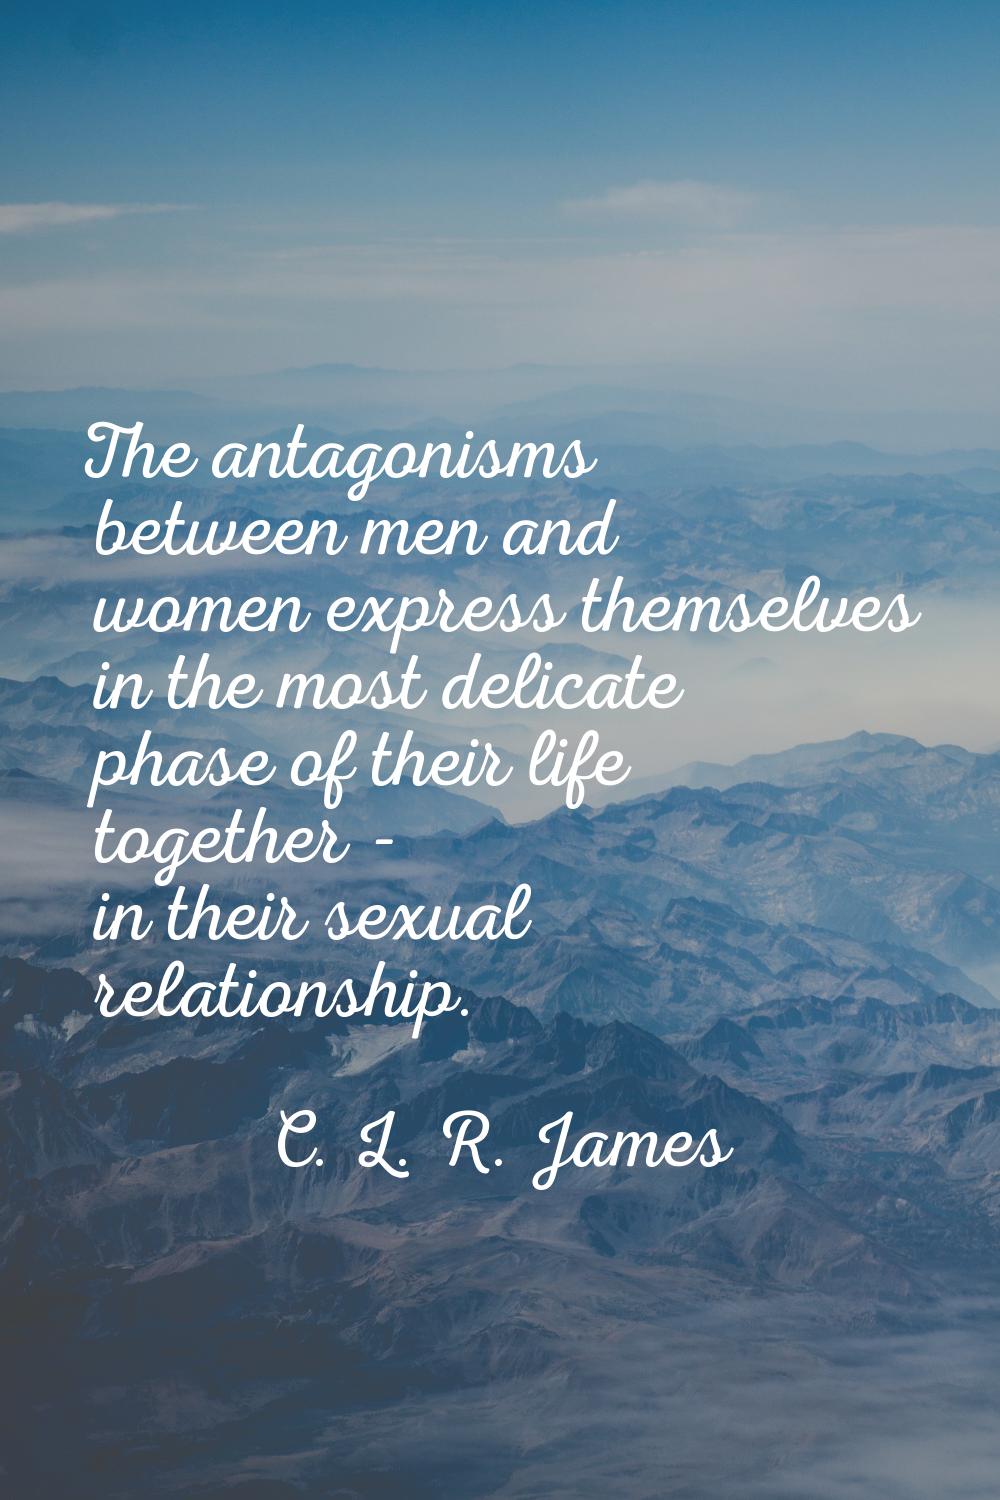 The antagonisms between men and women express themselves in the most delicate phase of their life t